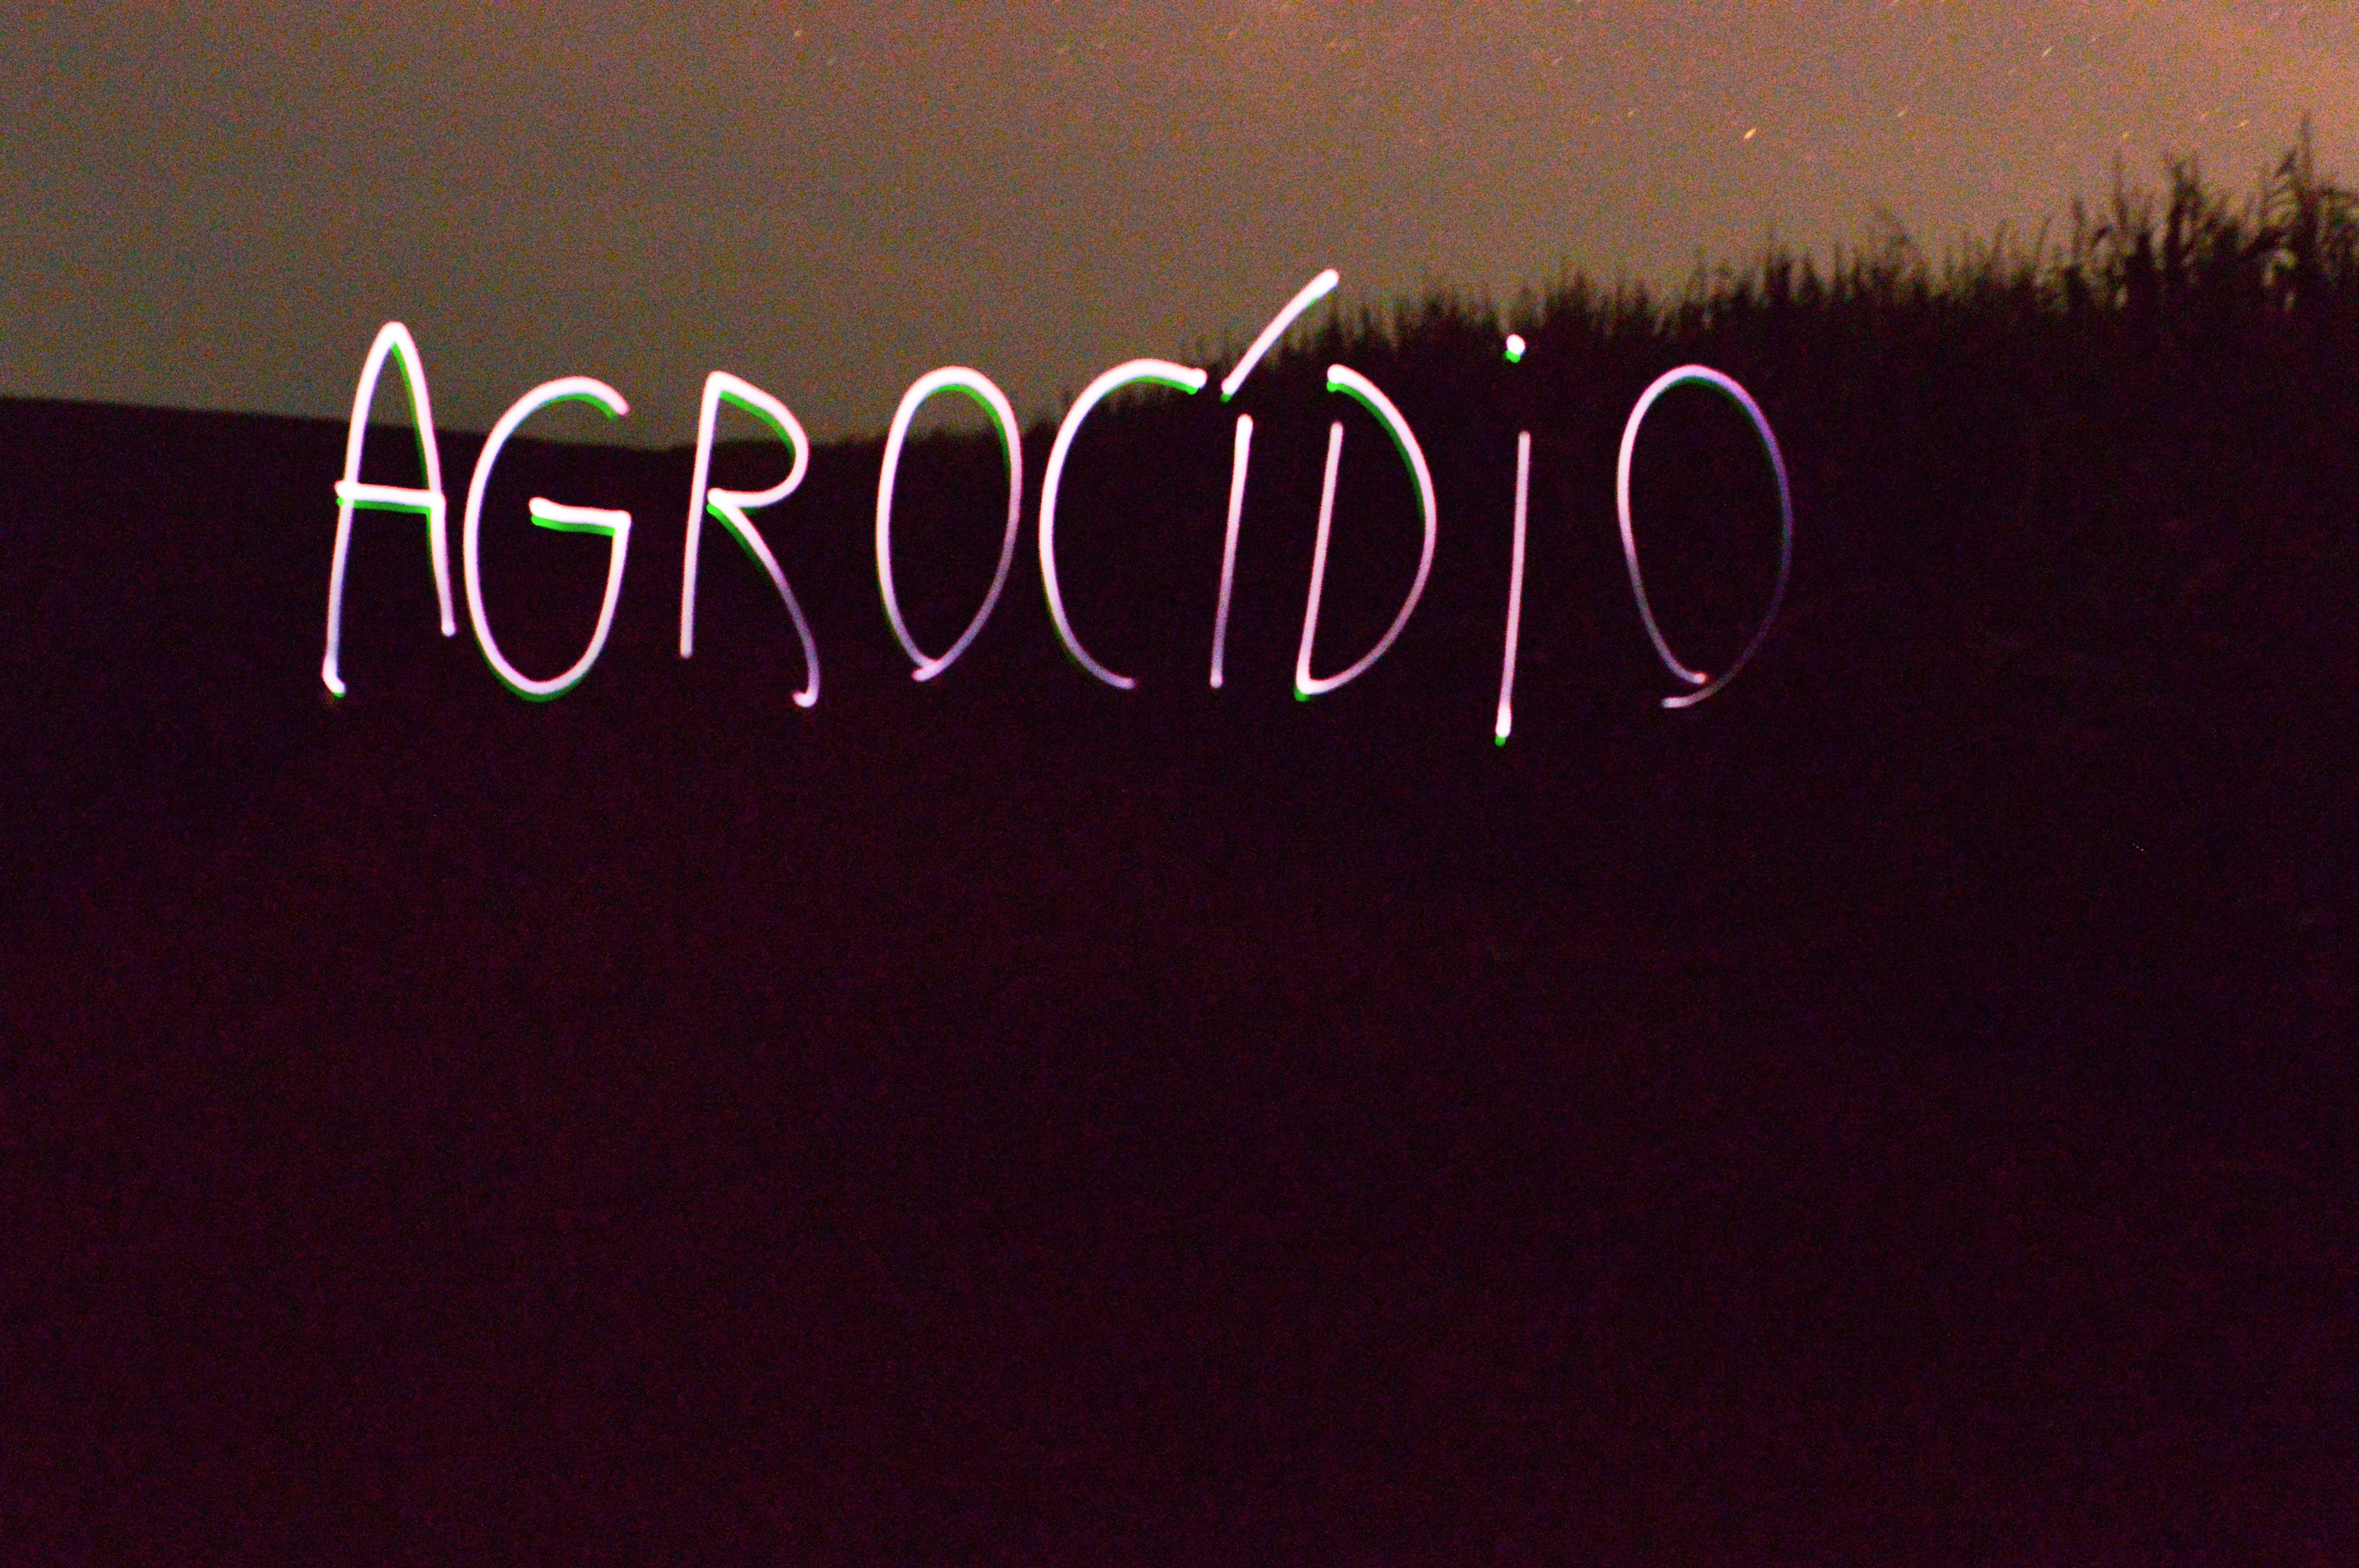 The text 'Agrocidio' written over a dark landscape.